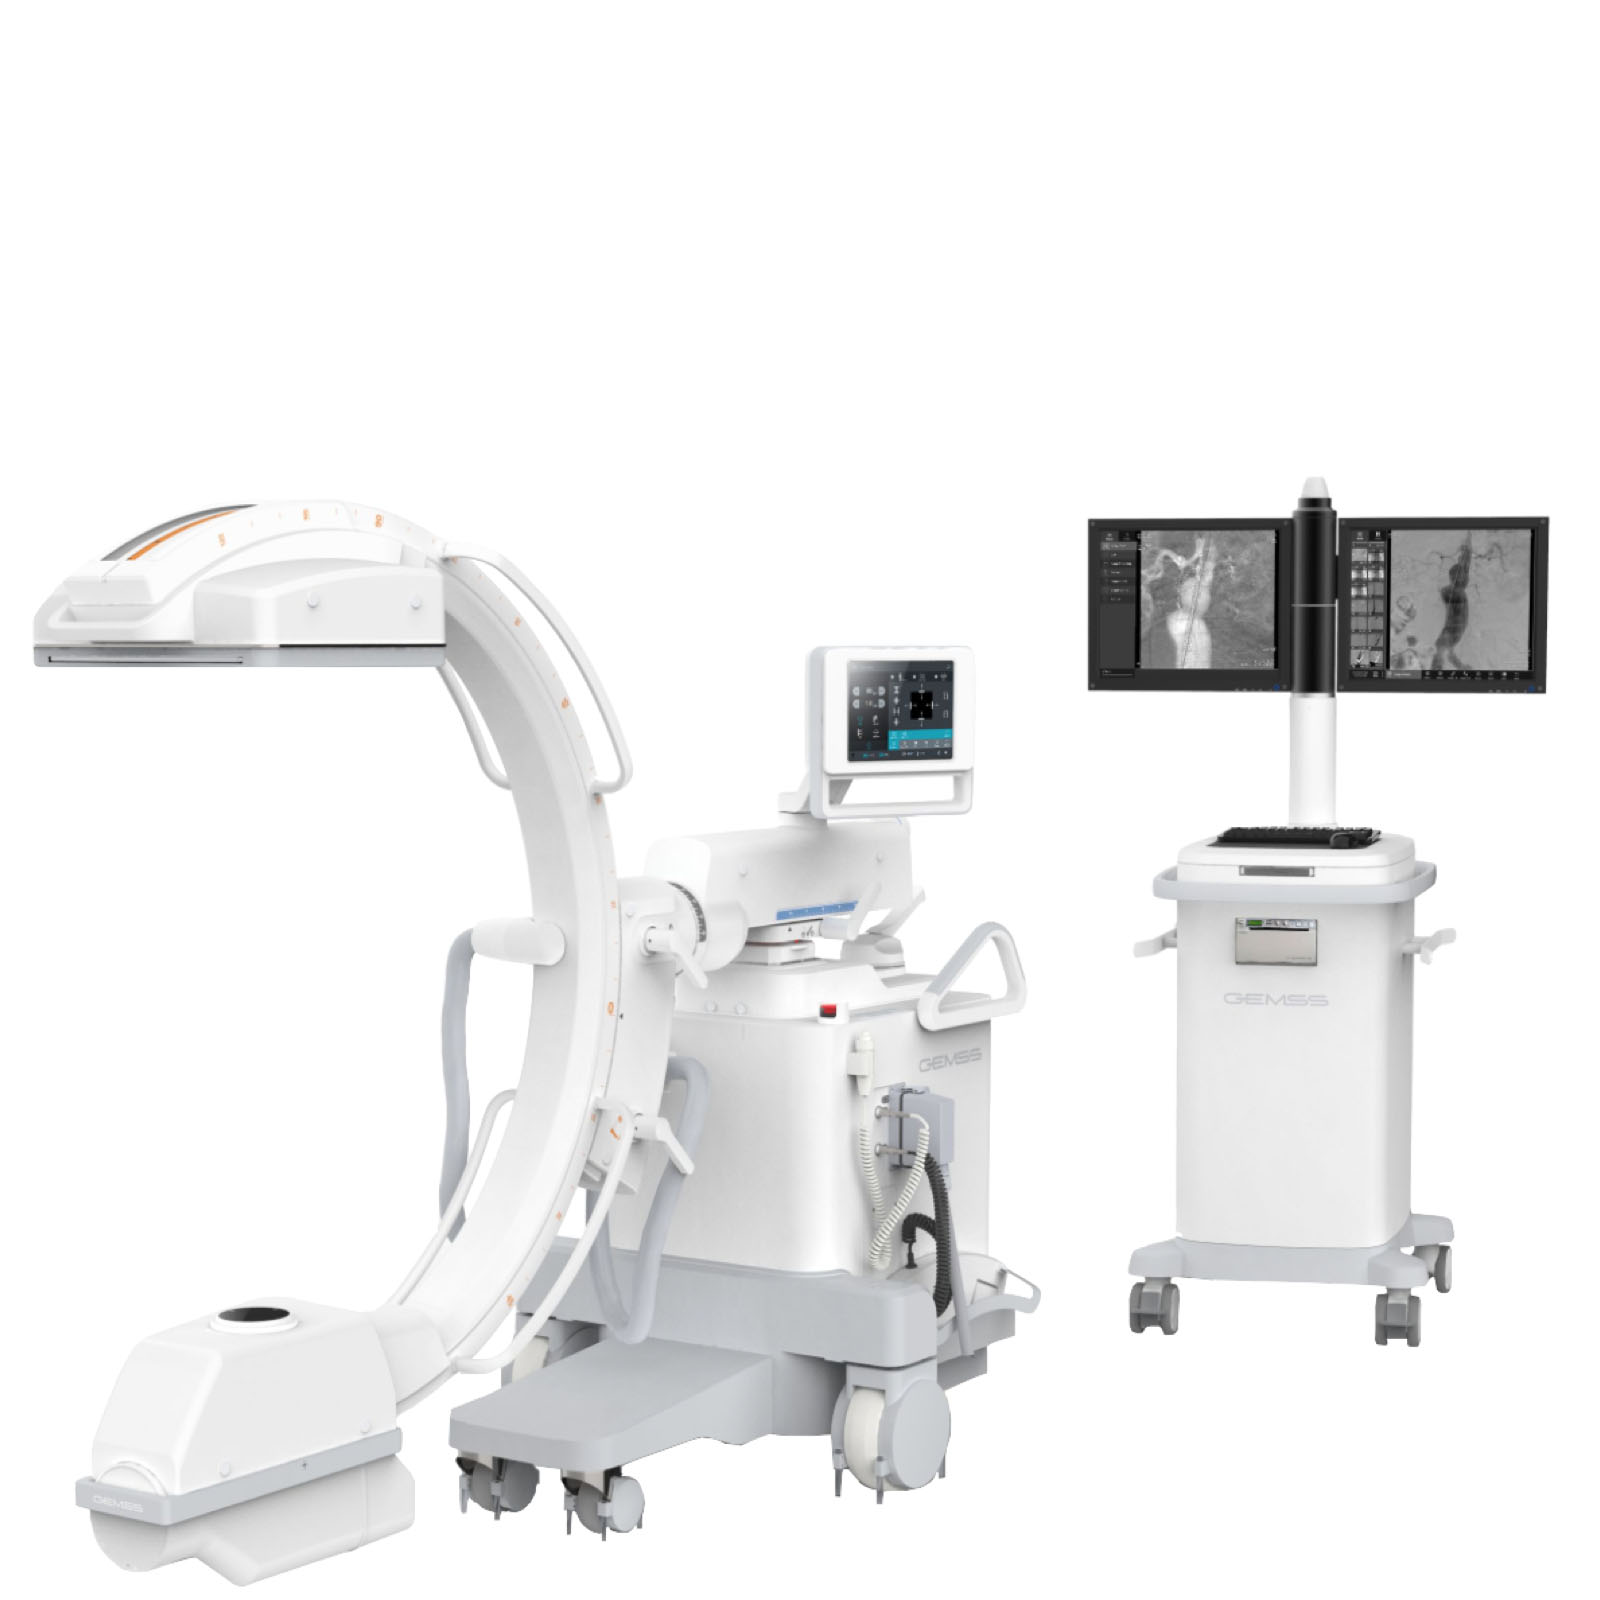 Angiography Devices Market Latest Trends and Analysis, Future Growth Study by 2032